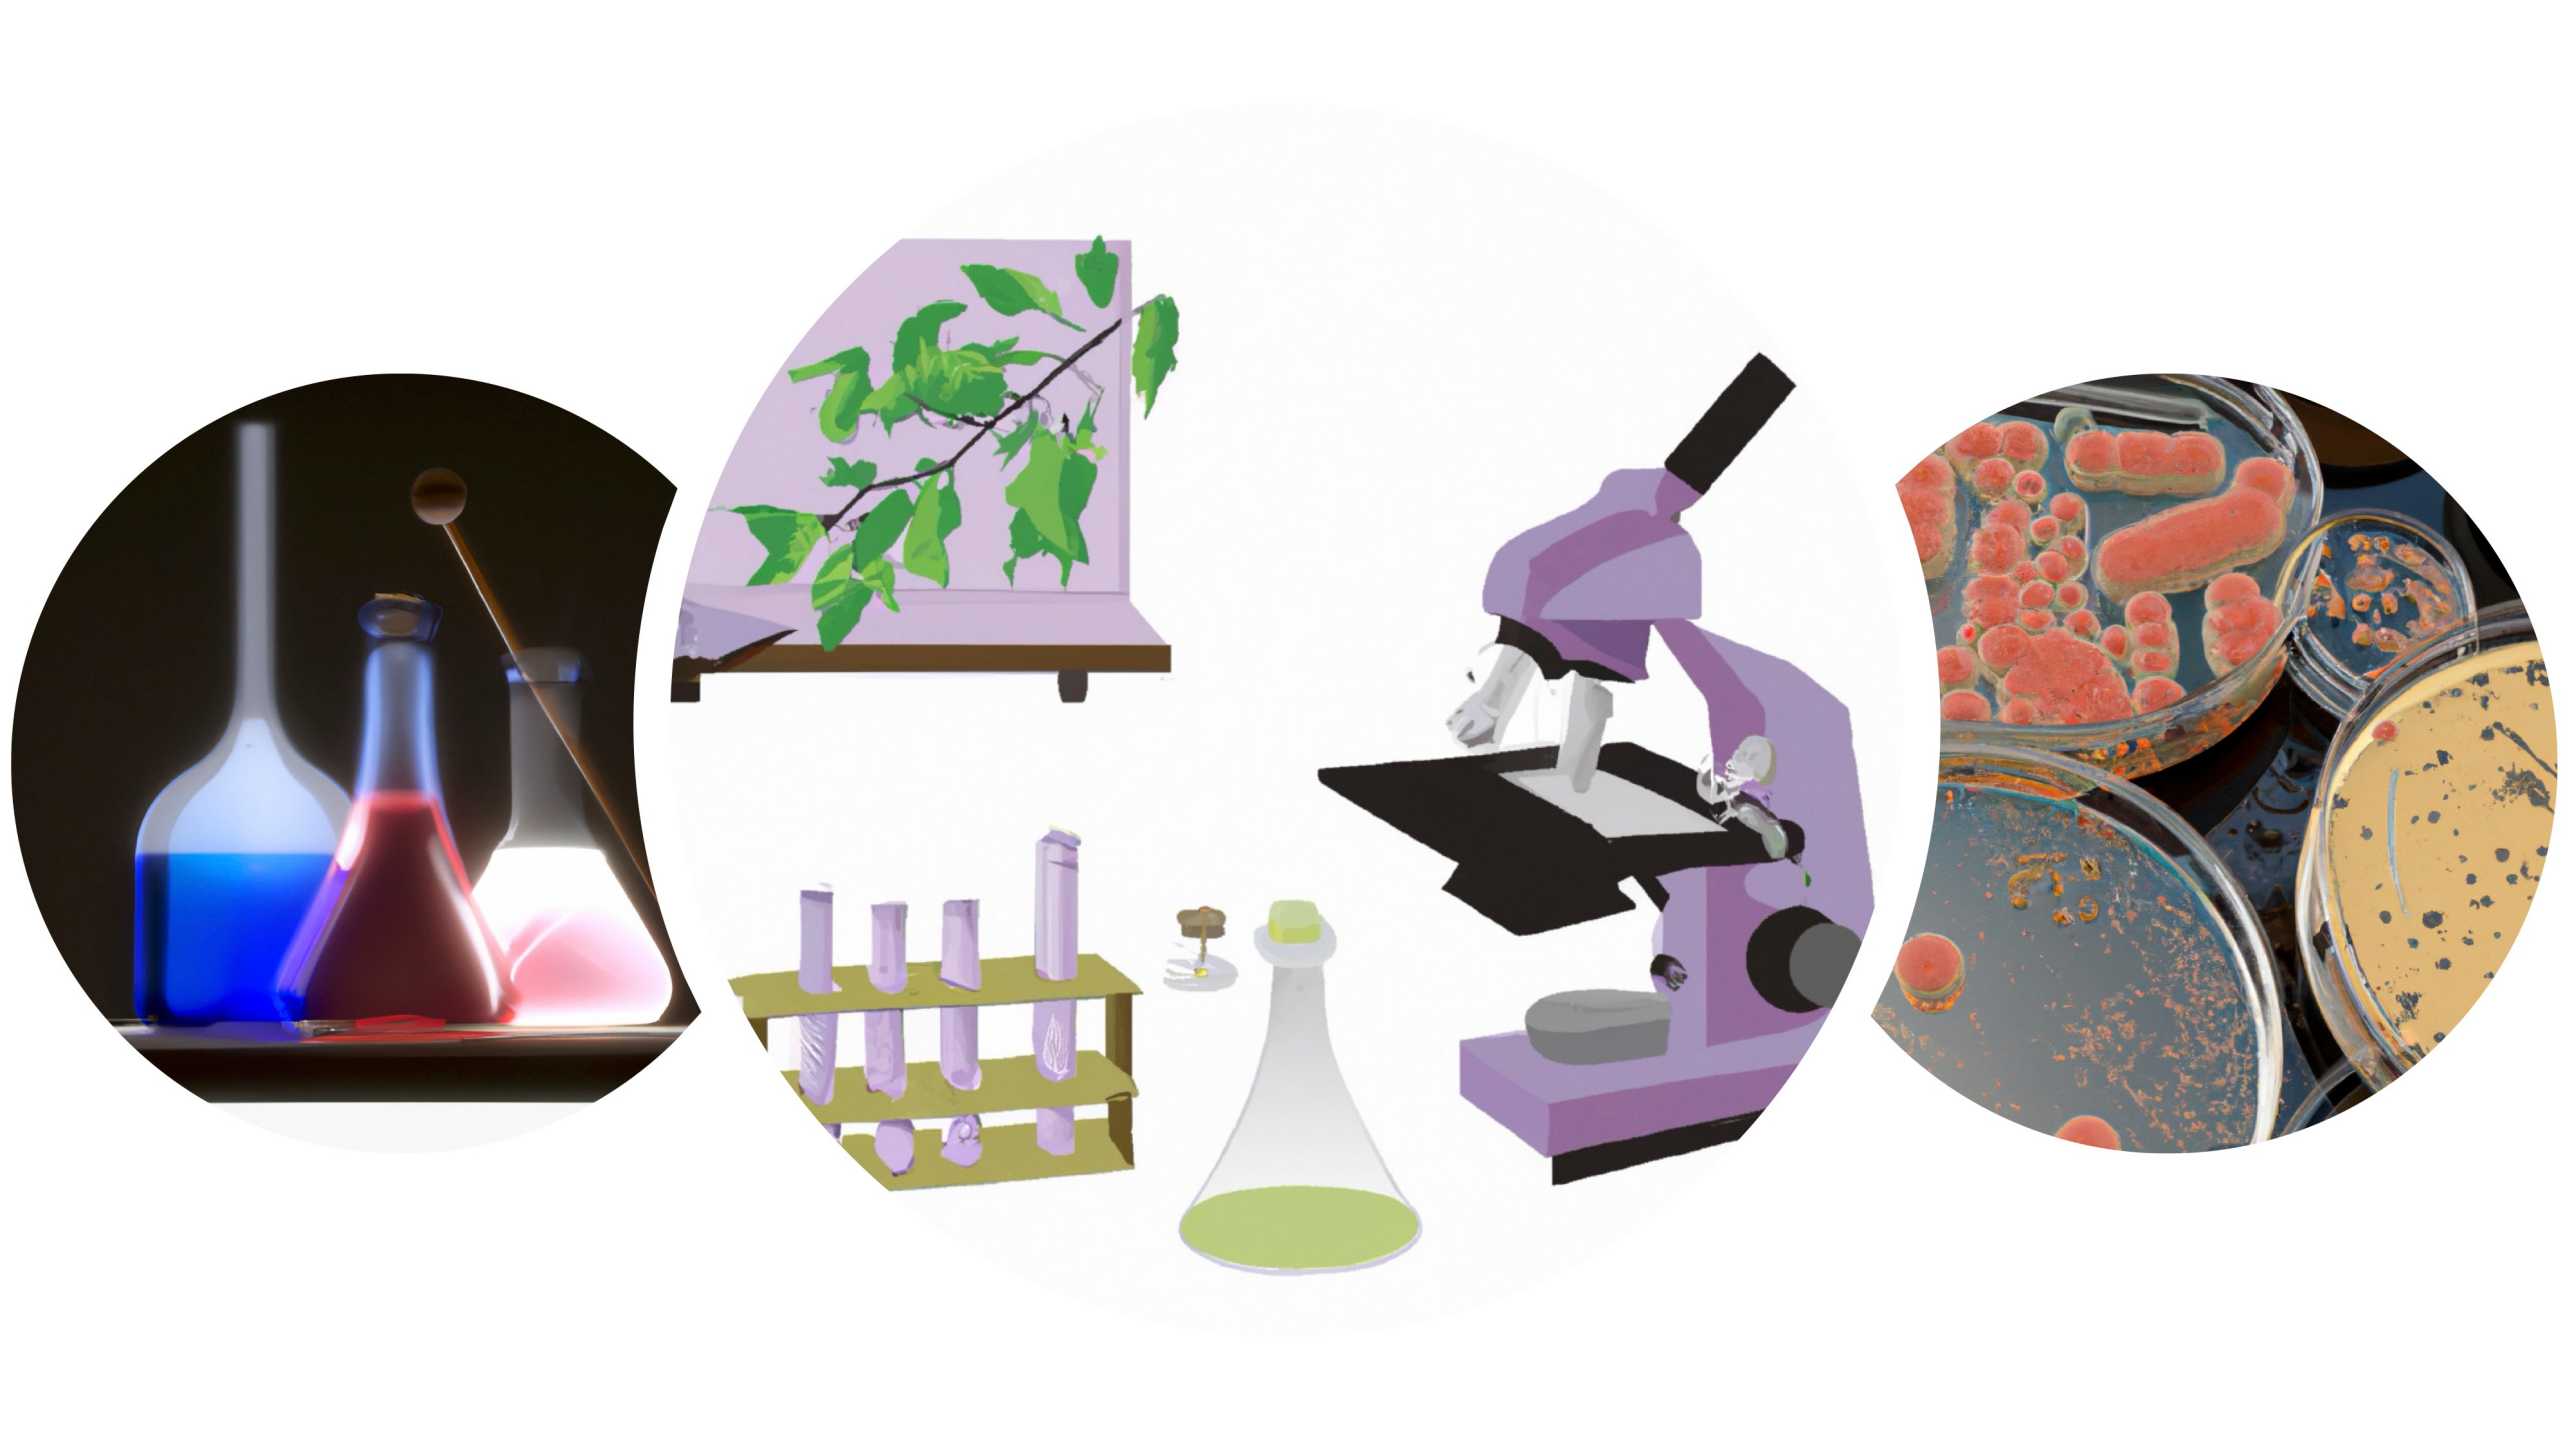 Central image of a laboratory set-up with a microscope and test tubes, with adjacent images of culture plates and chemistry flasks.